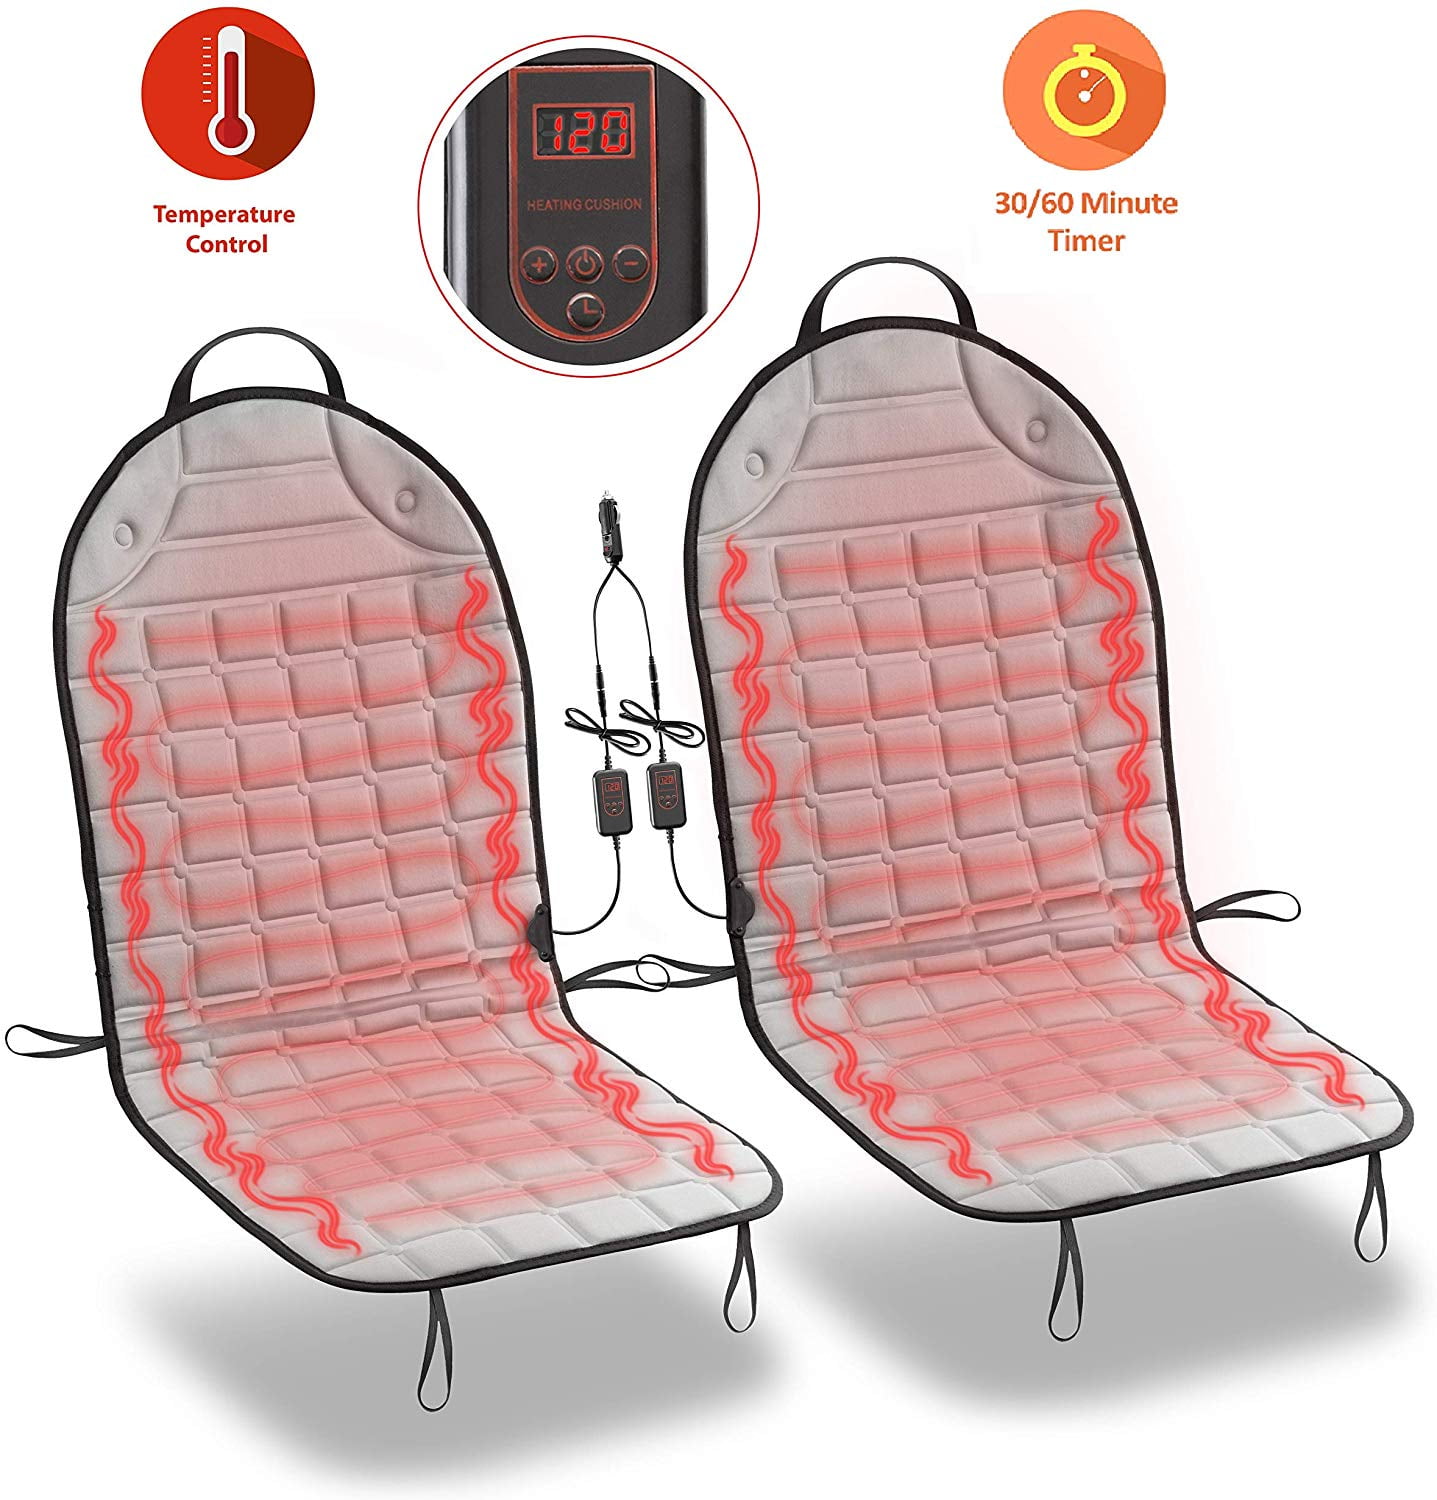 Qdreclod Heated Car Seat Cushion 12 V Universal Car Heating Pad 30 Fast Heating Car Seat Cover Auto Constant Temperature Car seat Warmer with Temperature Control 